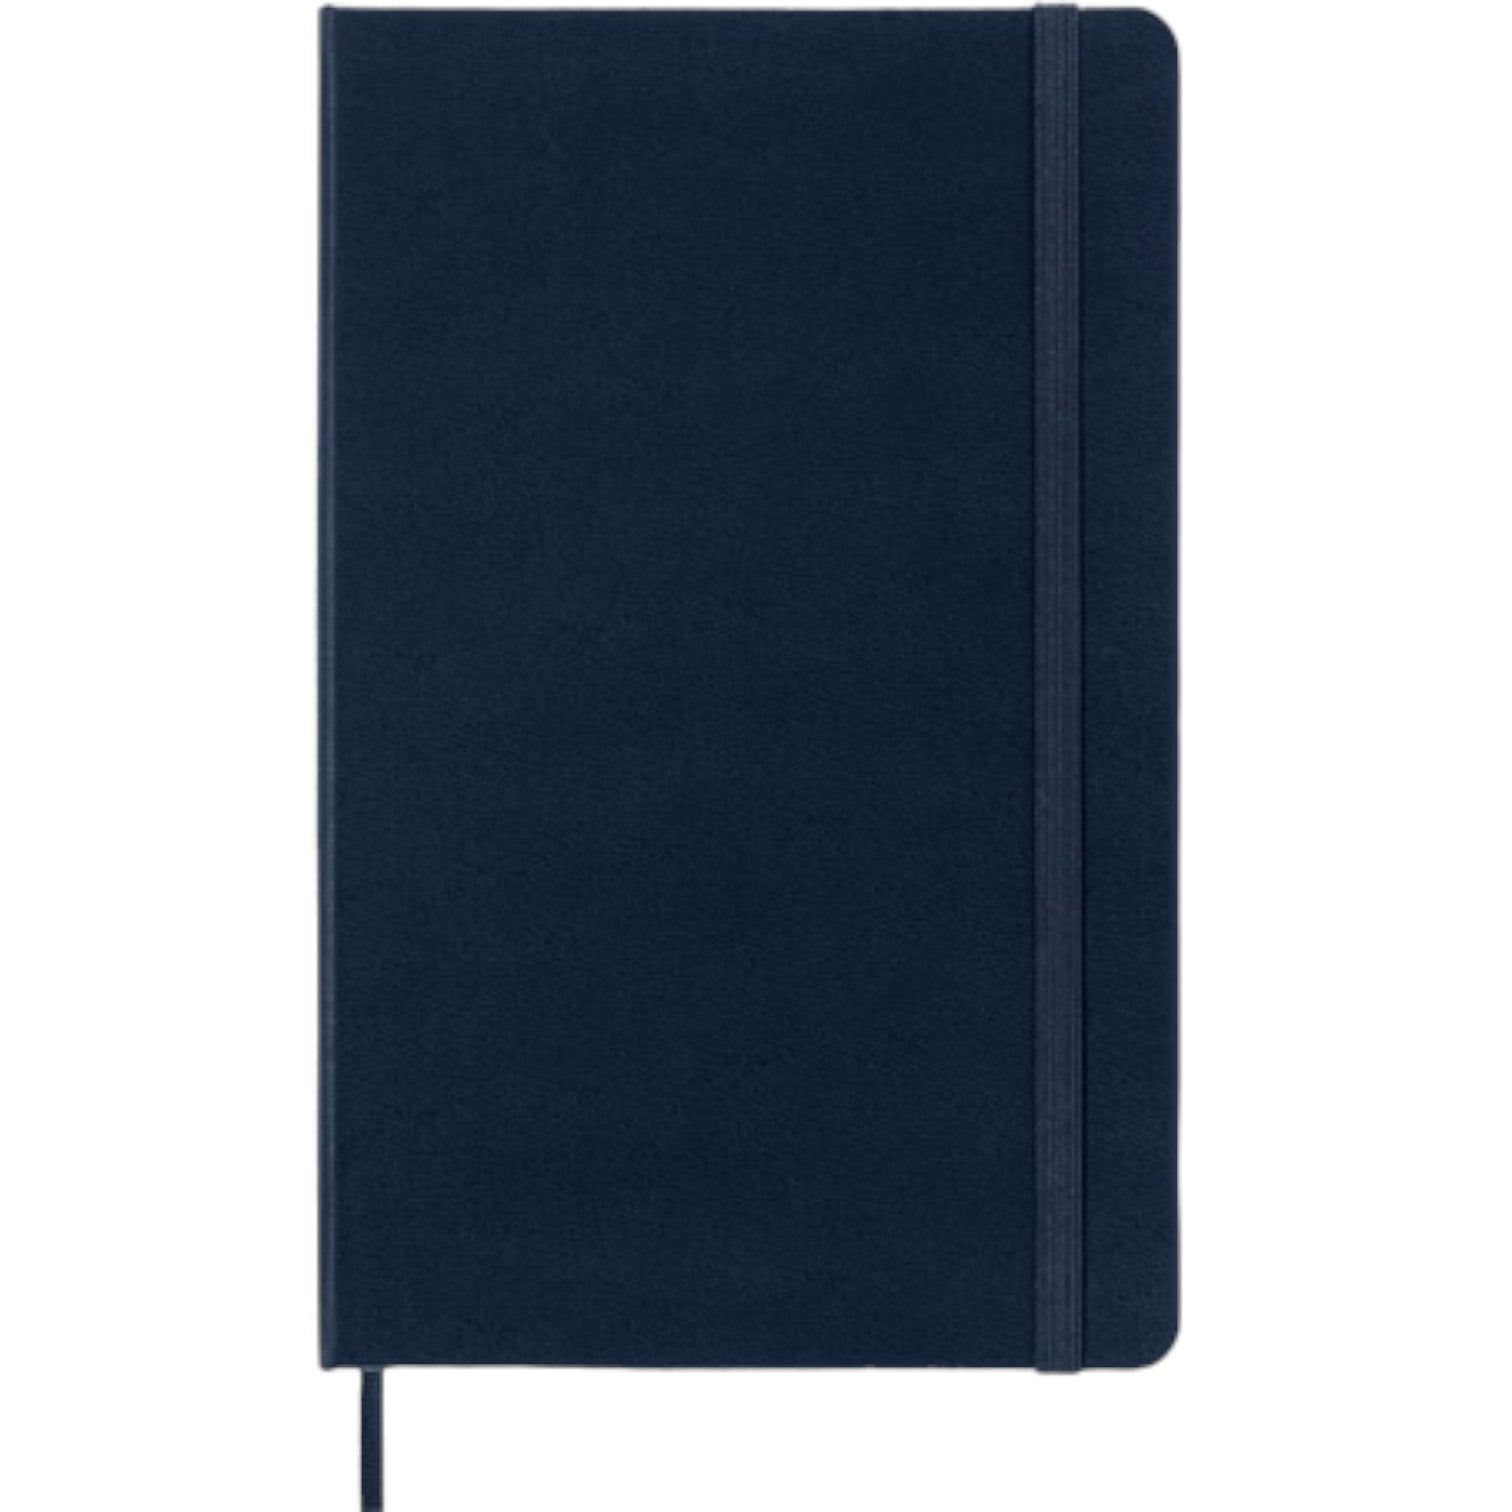 Large Ruled Hard Cover Notebook - Navy Blue